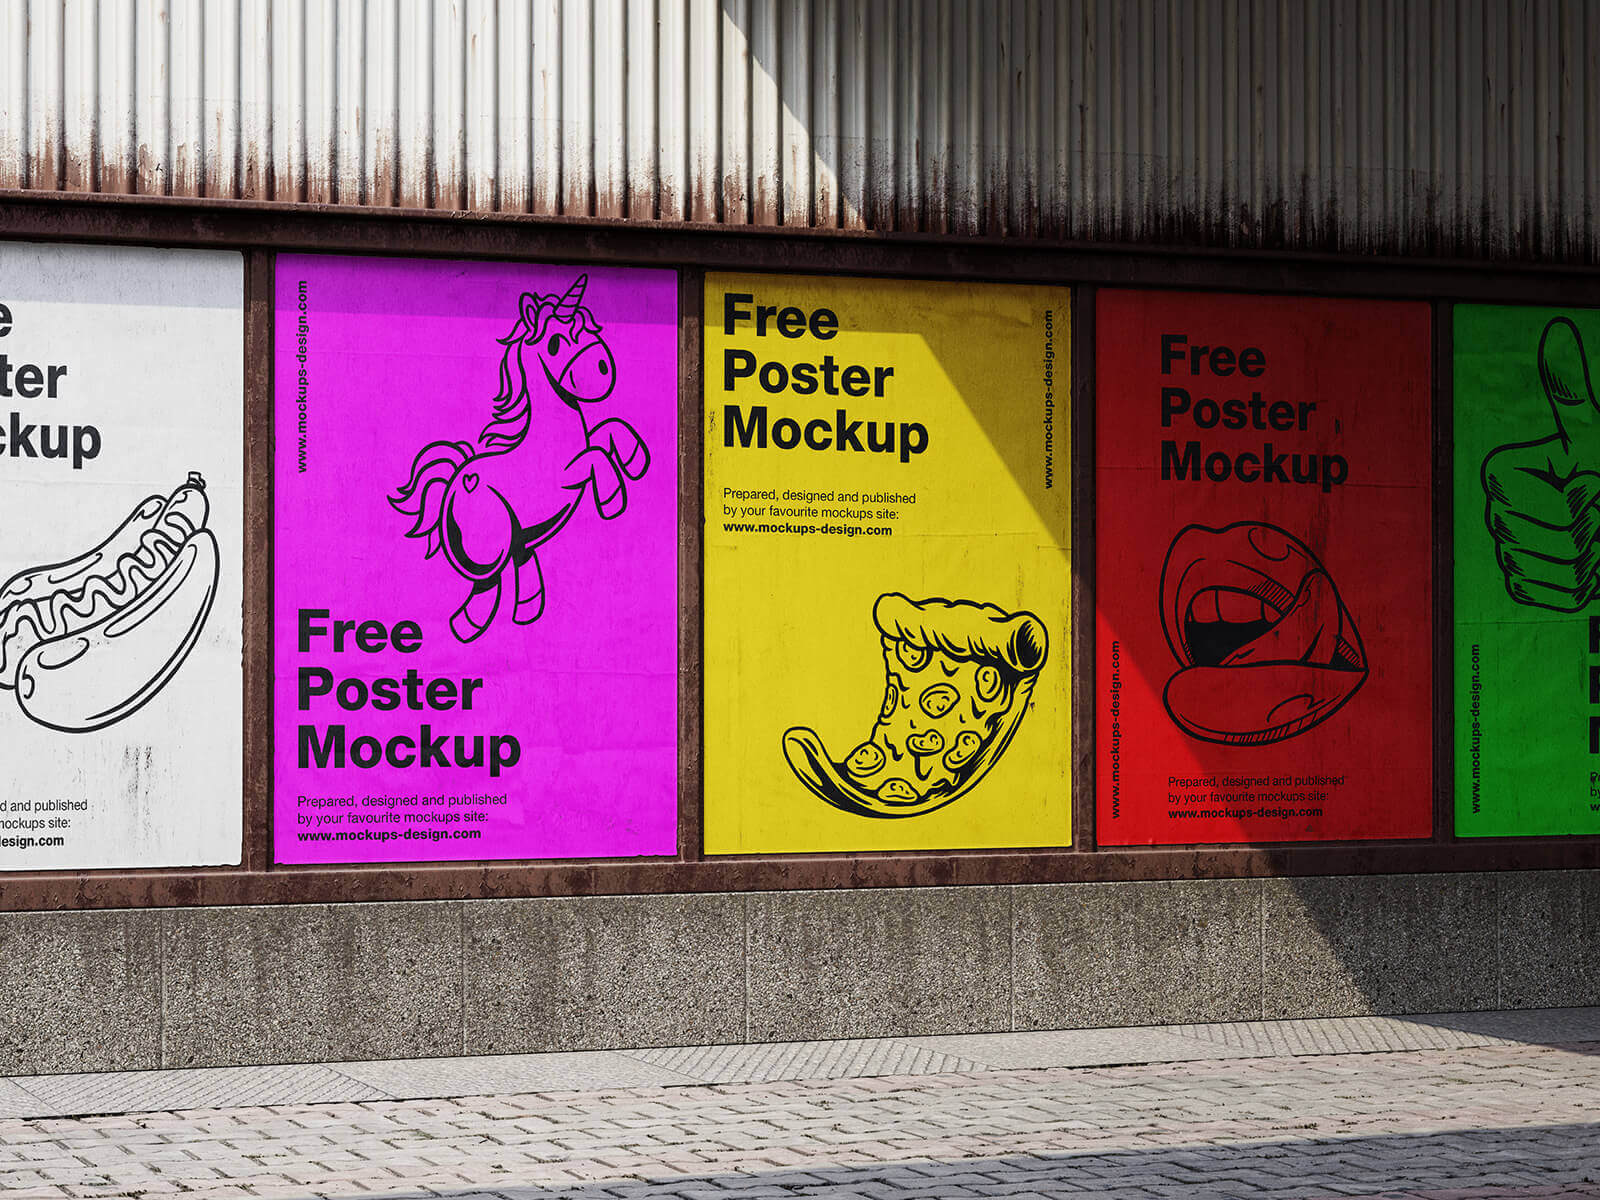 Free A2 Lined-Up Street Posters Mockup PSD Set